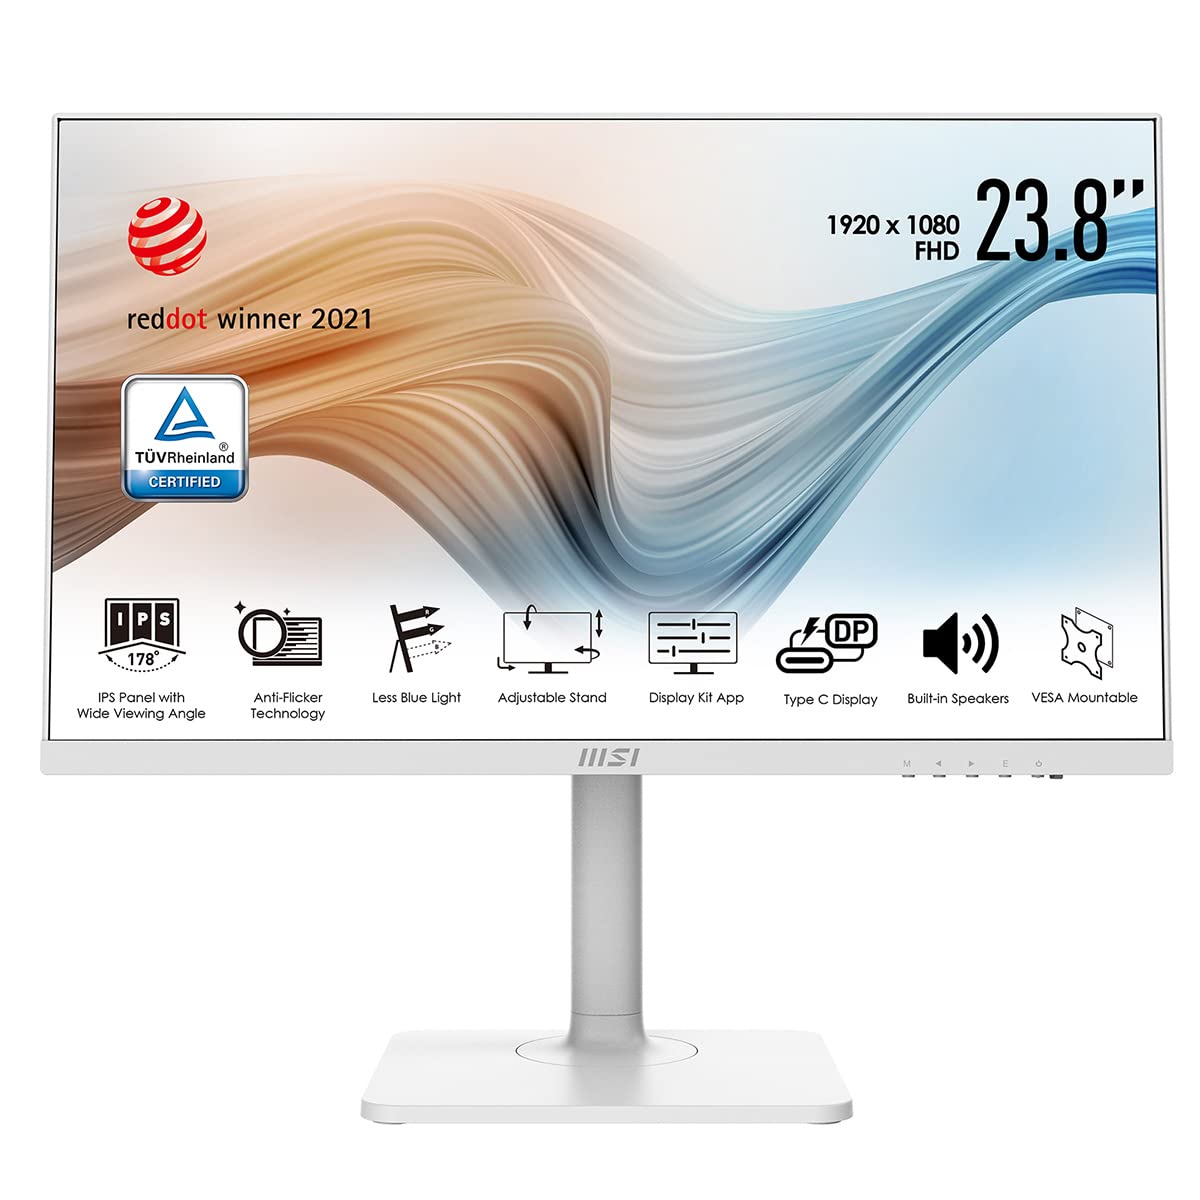 MSI 24” IPS FHD (1920 x 1080) Non-Glare with Super Narrow Bezel 75Hz 1ms 16:9 with Adjustable Stand (Modern MD241PW)